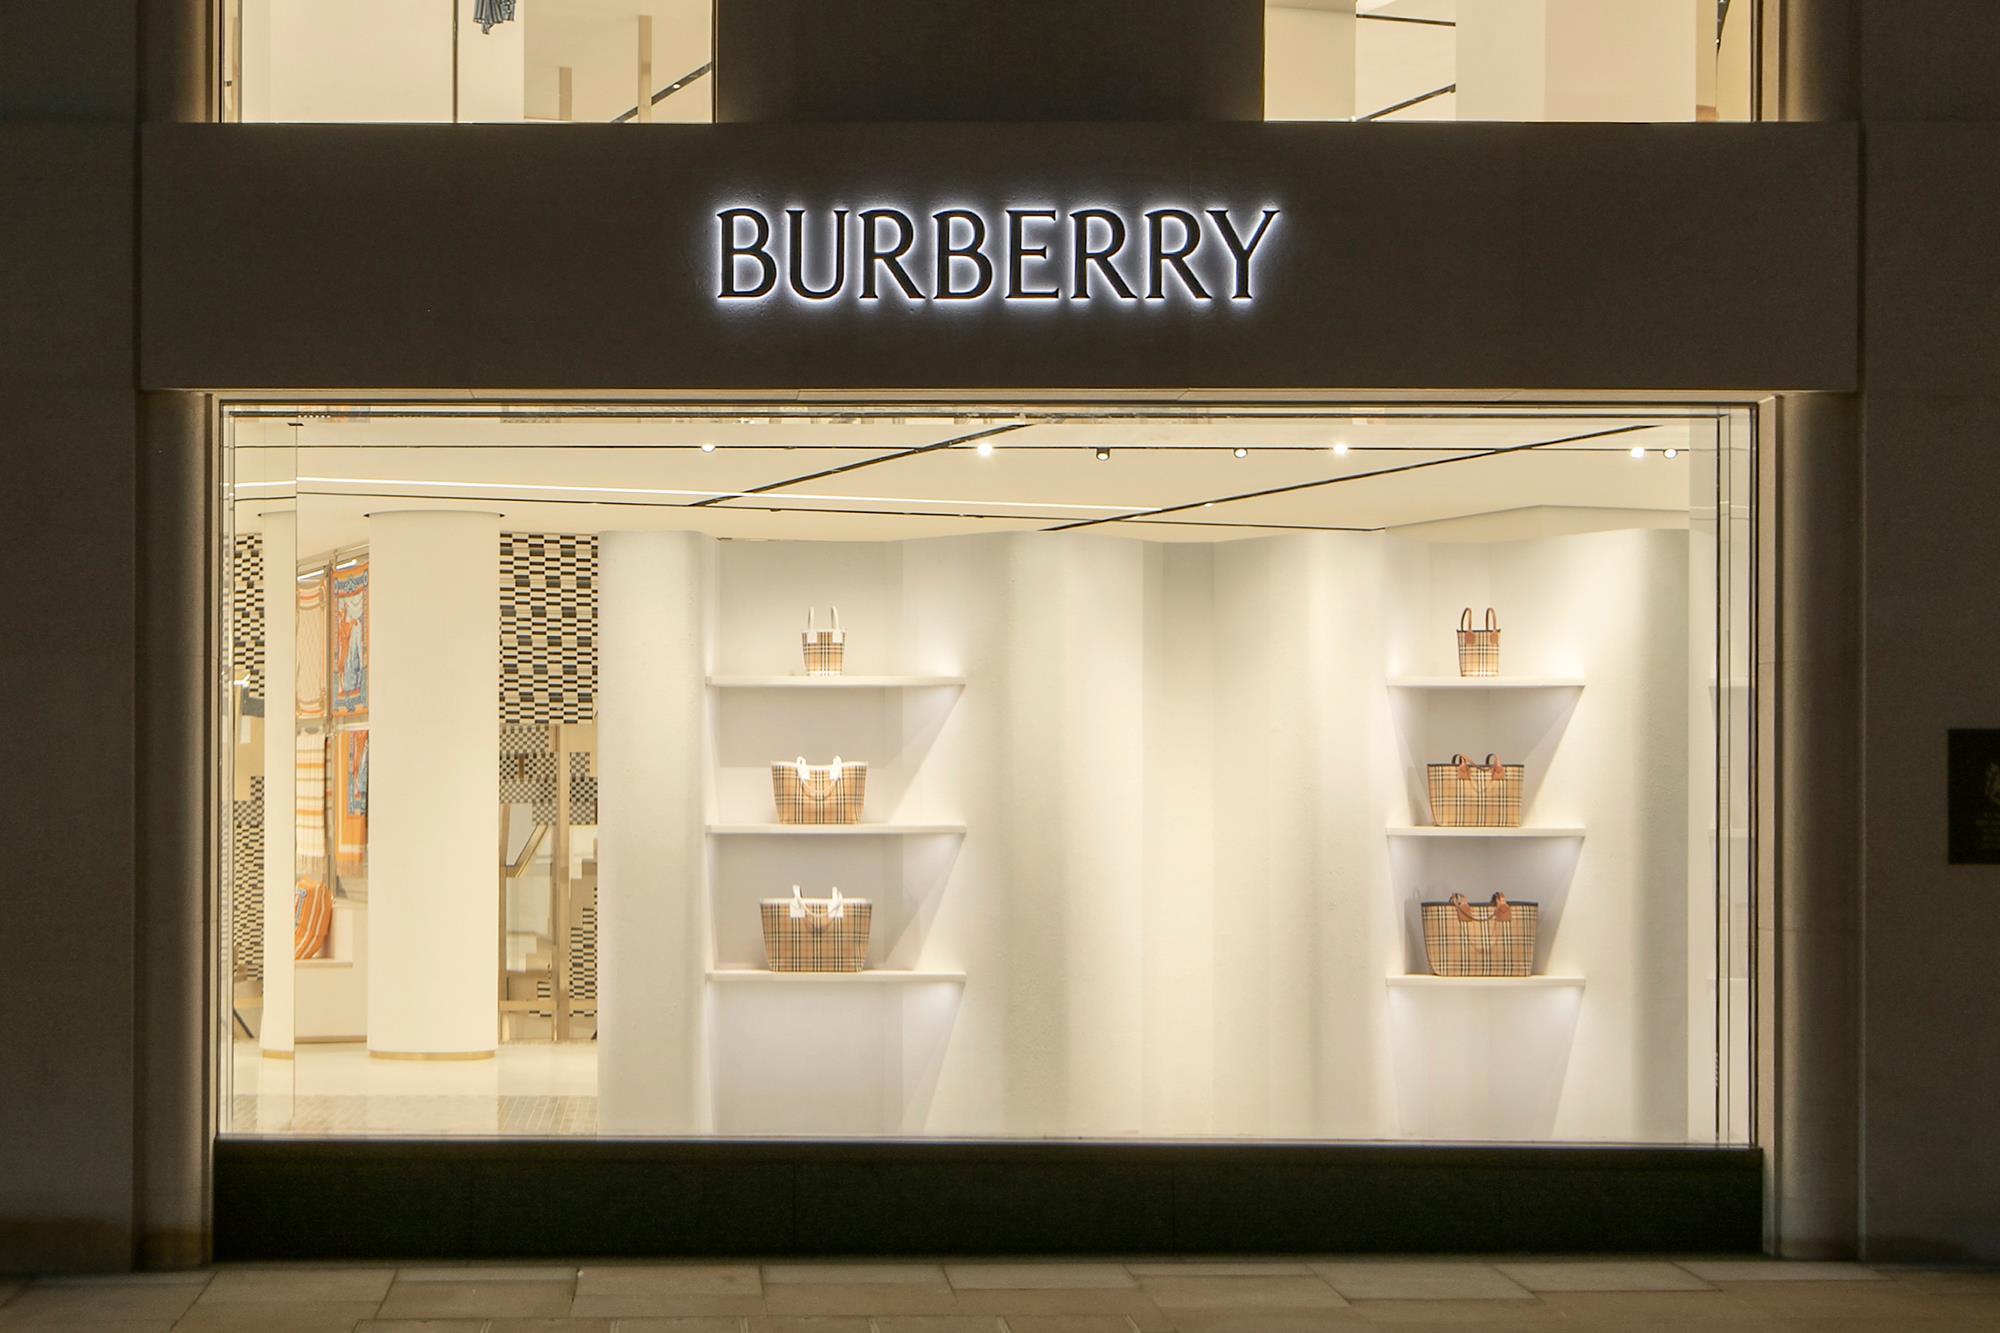 Burberry's flagship store on New Bond Street has reopened